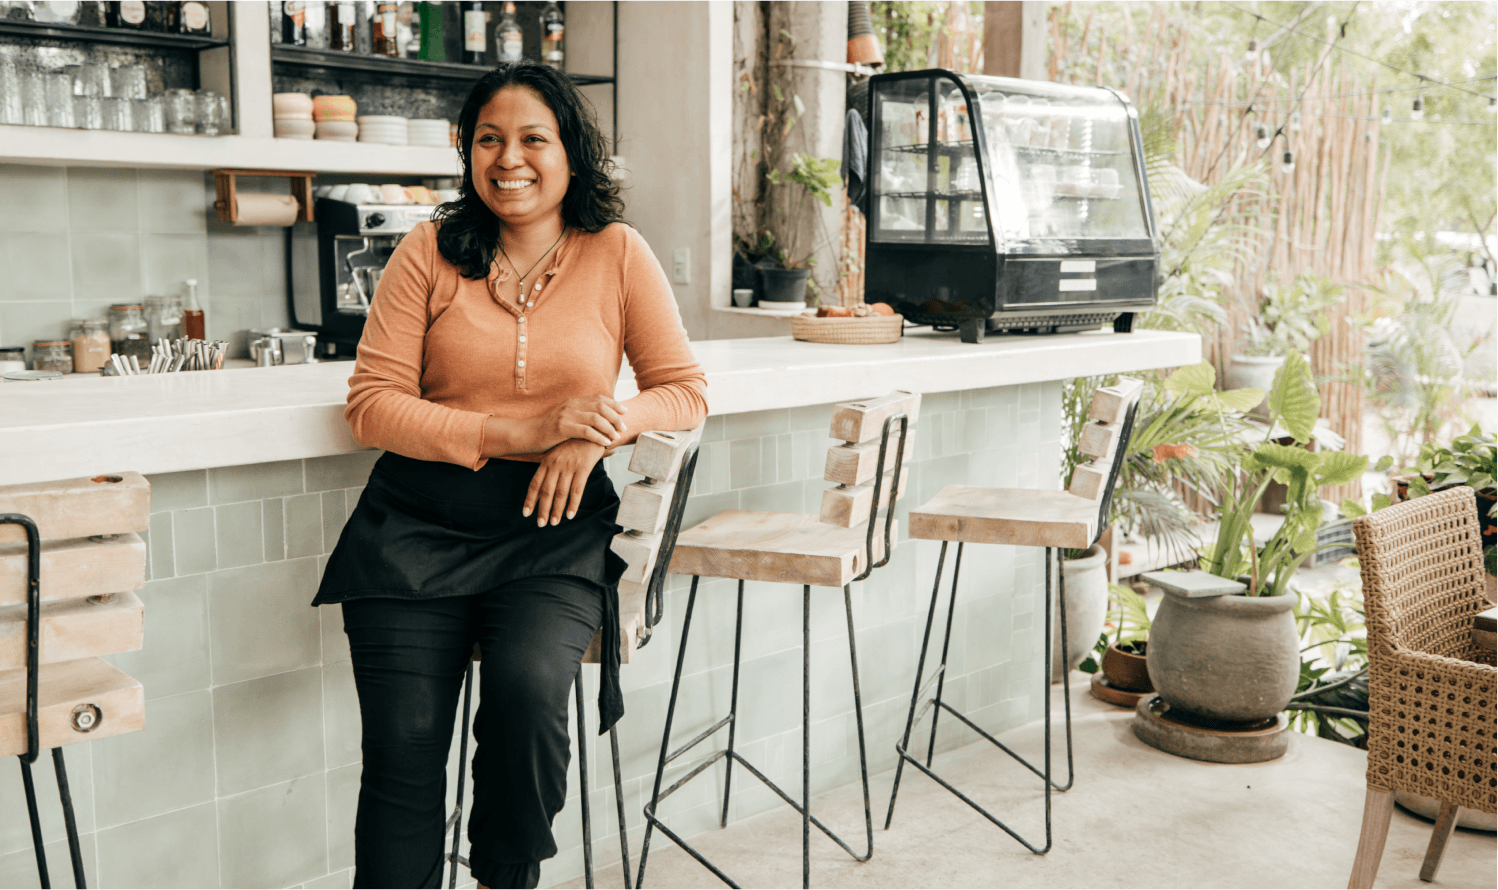 A smiling woman at the counter of a coffee shop.